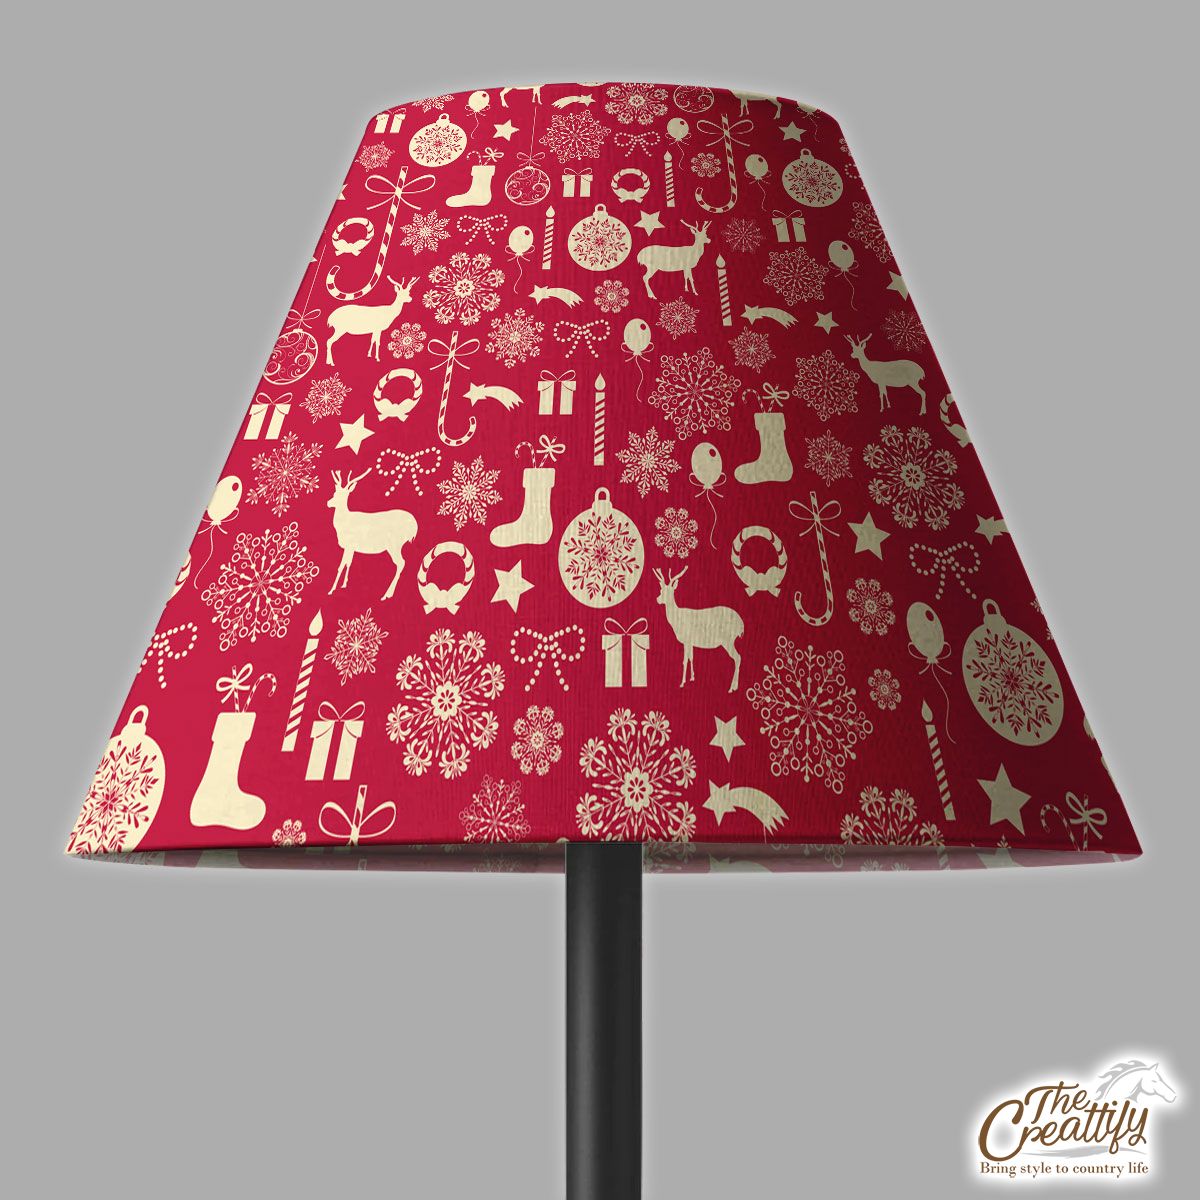 Happy Christmas With Reindeer, Christmas Balls, Socks, Candy Canes On Snowflake Background Lamp Cover